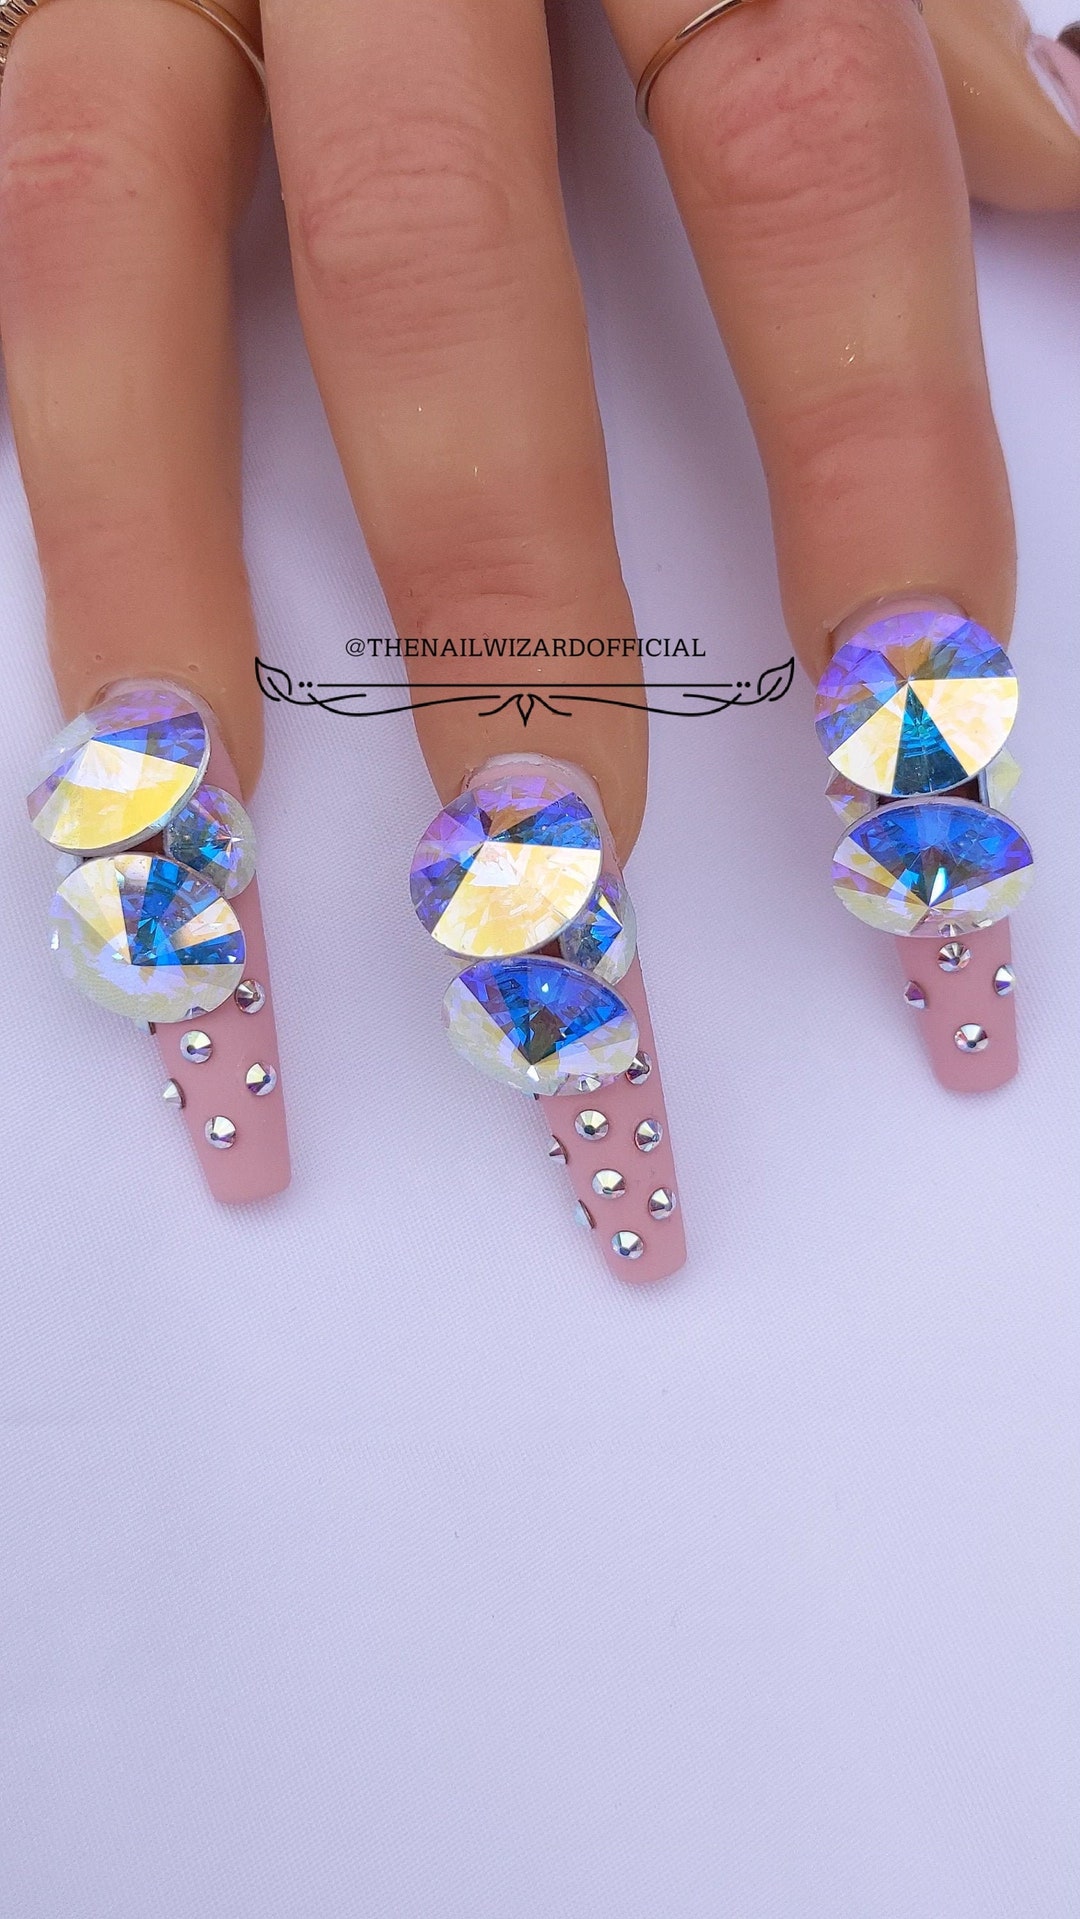 Swarovski Rhinestones  The Best Products For Nails